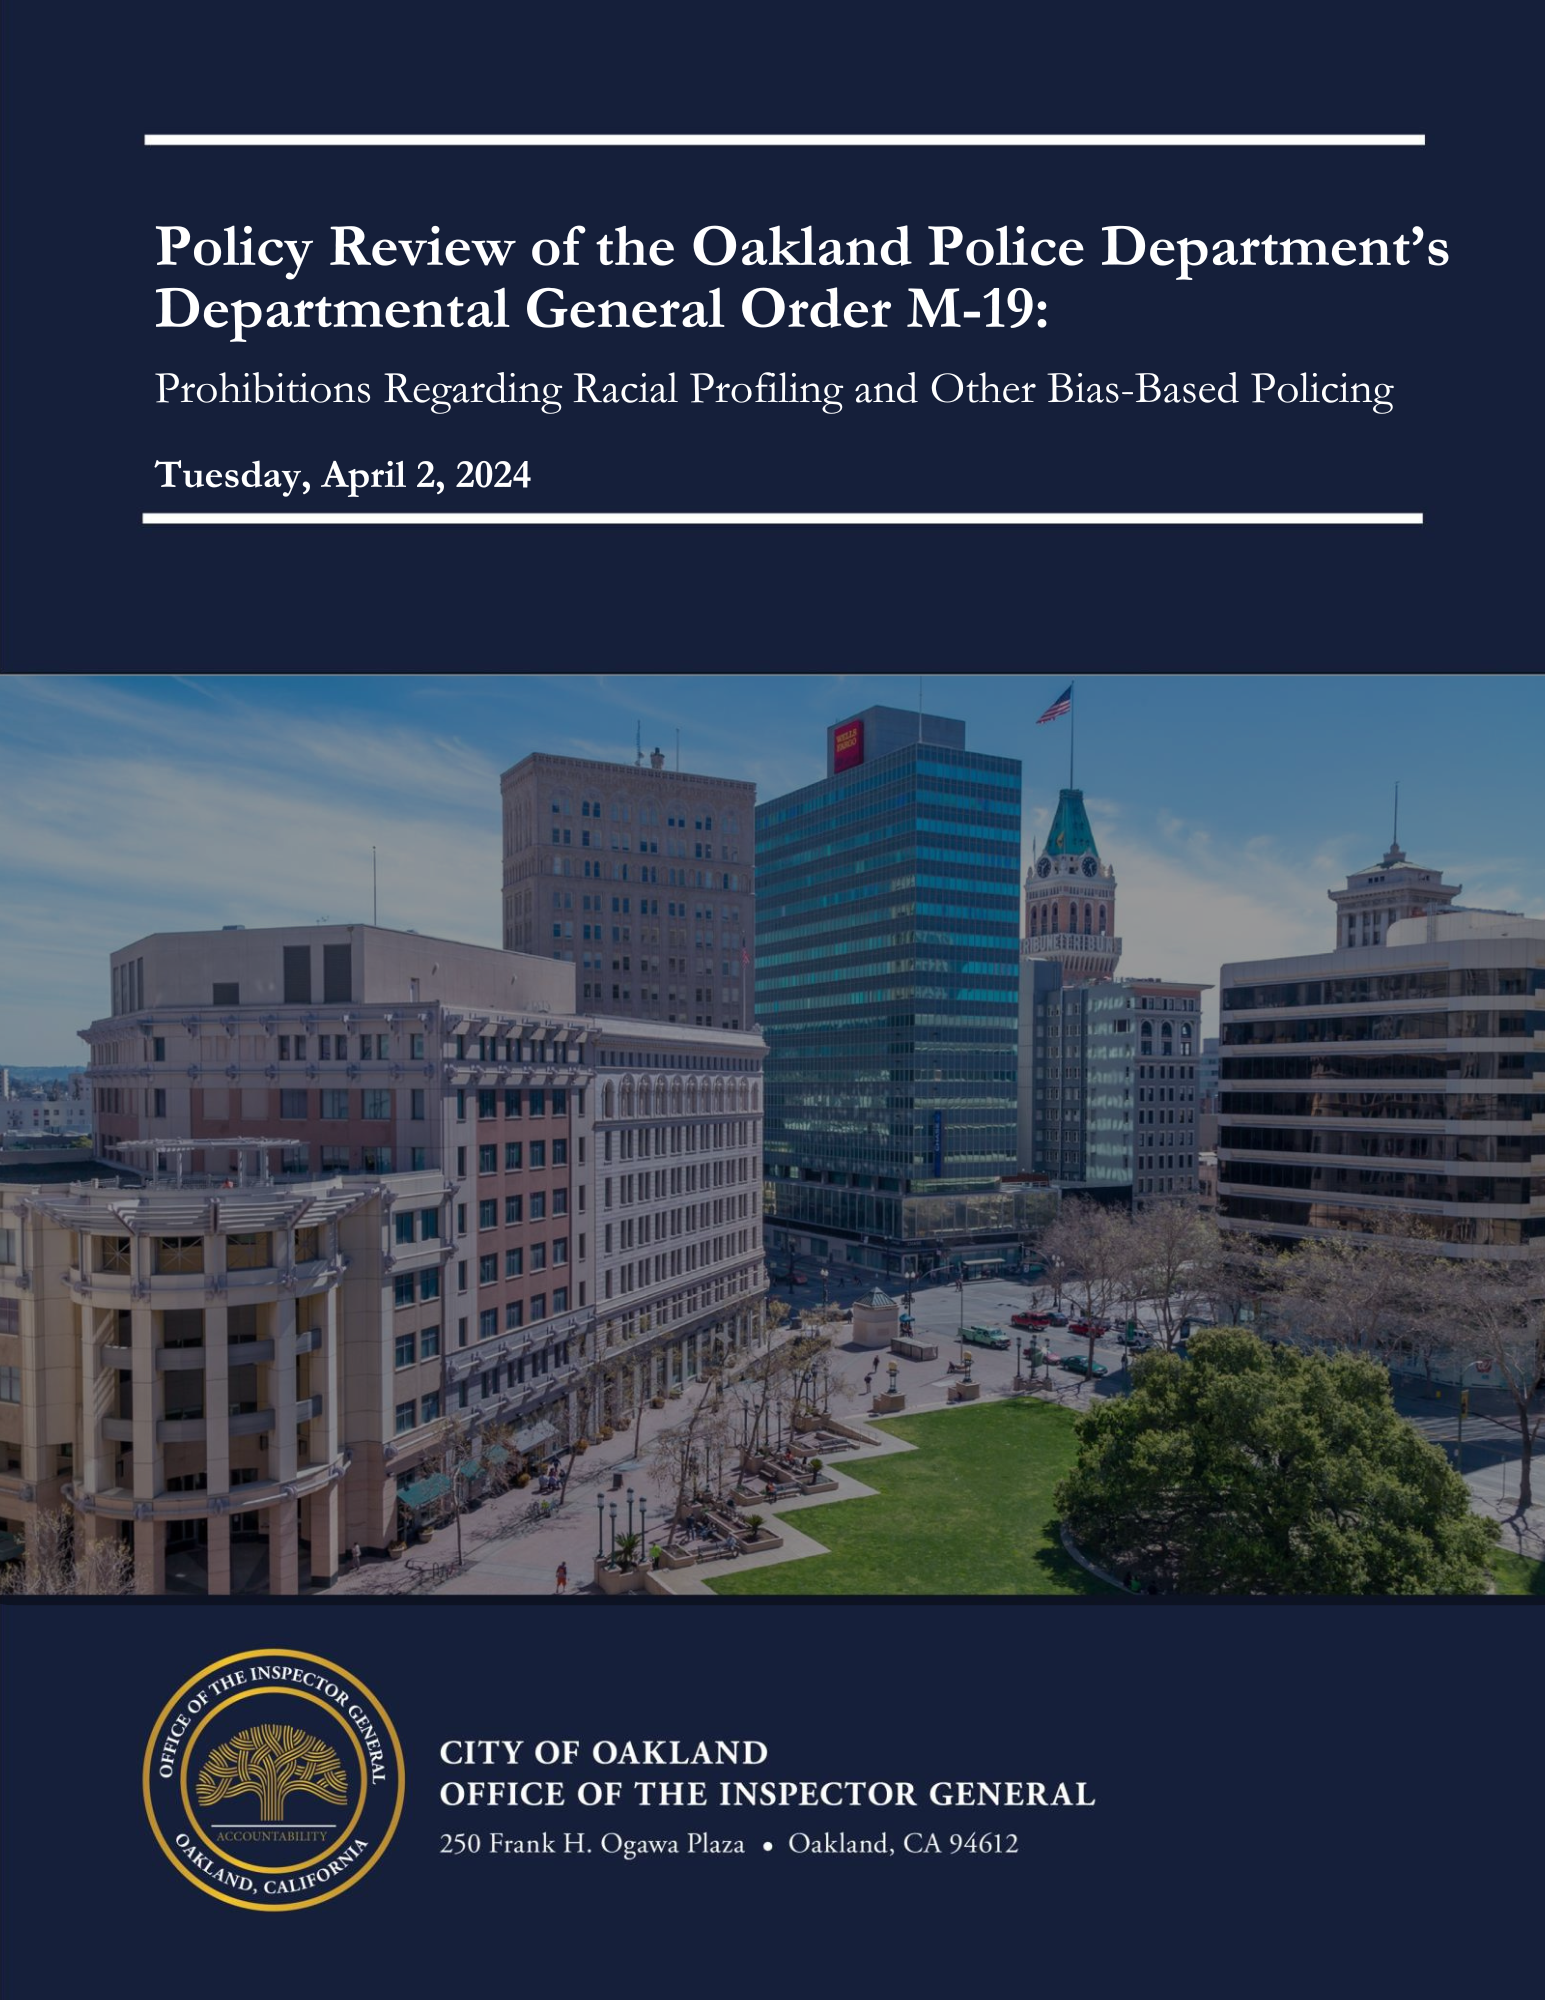 Policy Review of DGO M 19